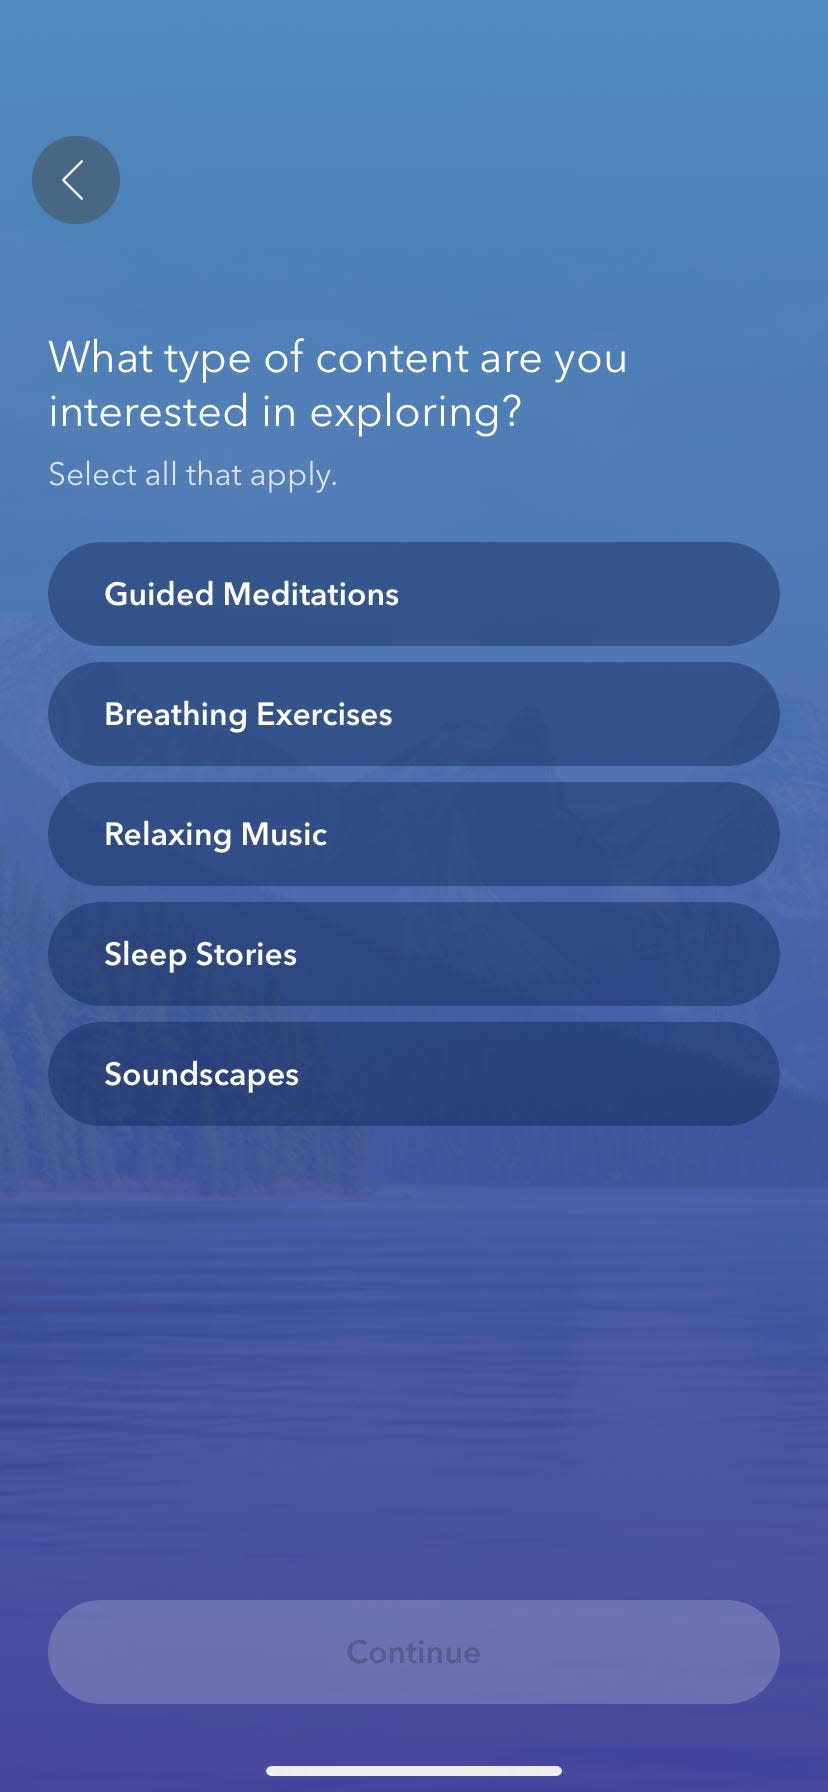 a blue screen and question "What type of content are you interested in exploring?" in a screenshot of the meditation app Calm